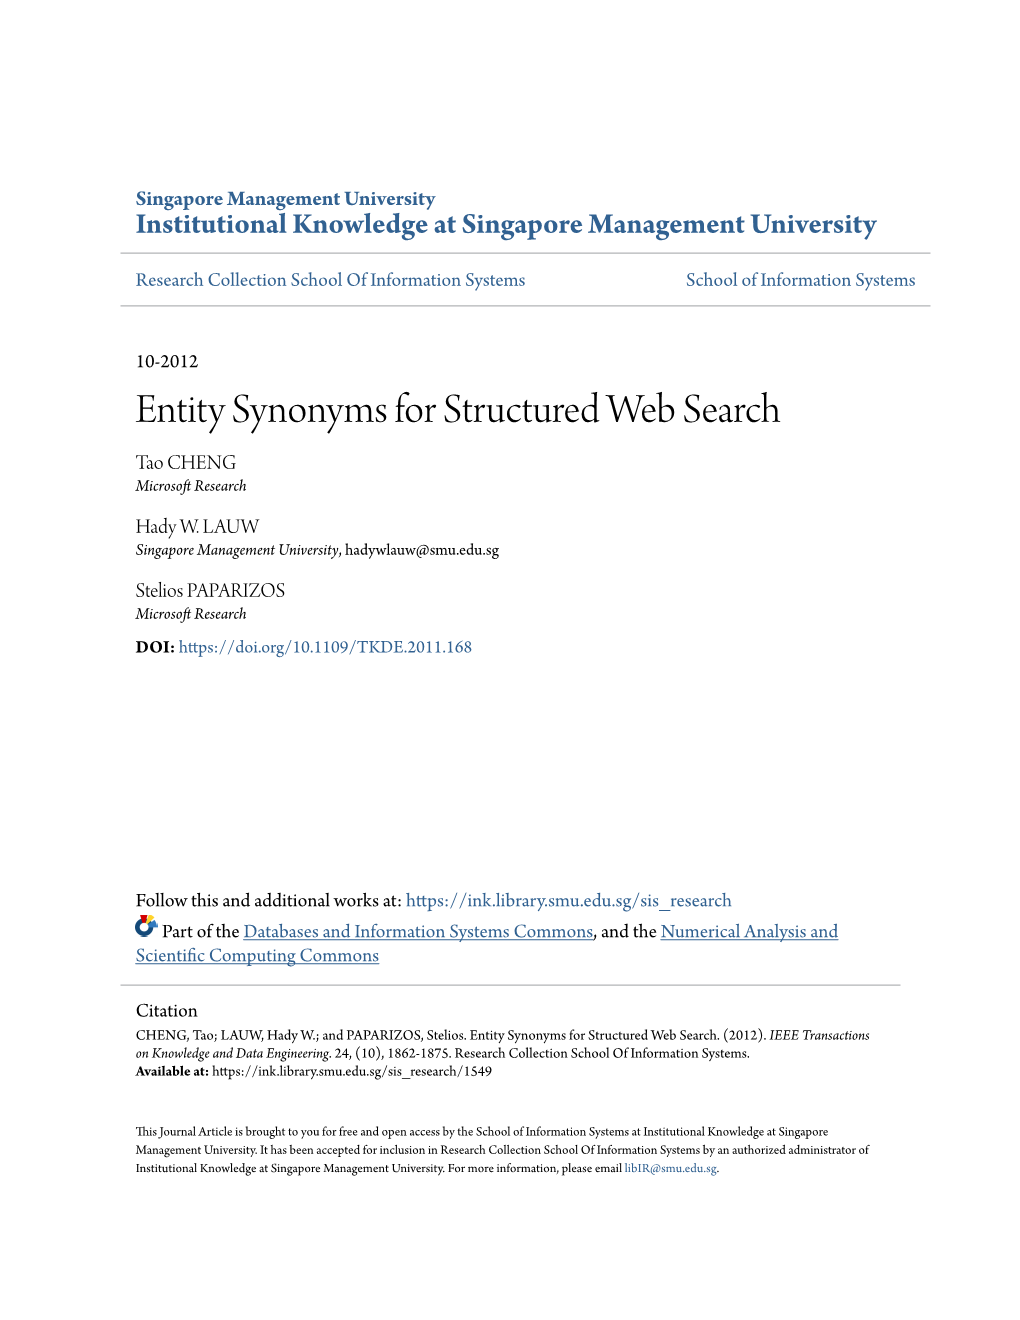 Entity Synonyms for Structured Web Search Tao CHENG Microsoft Research